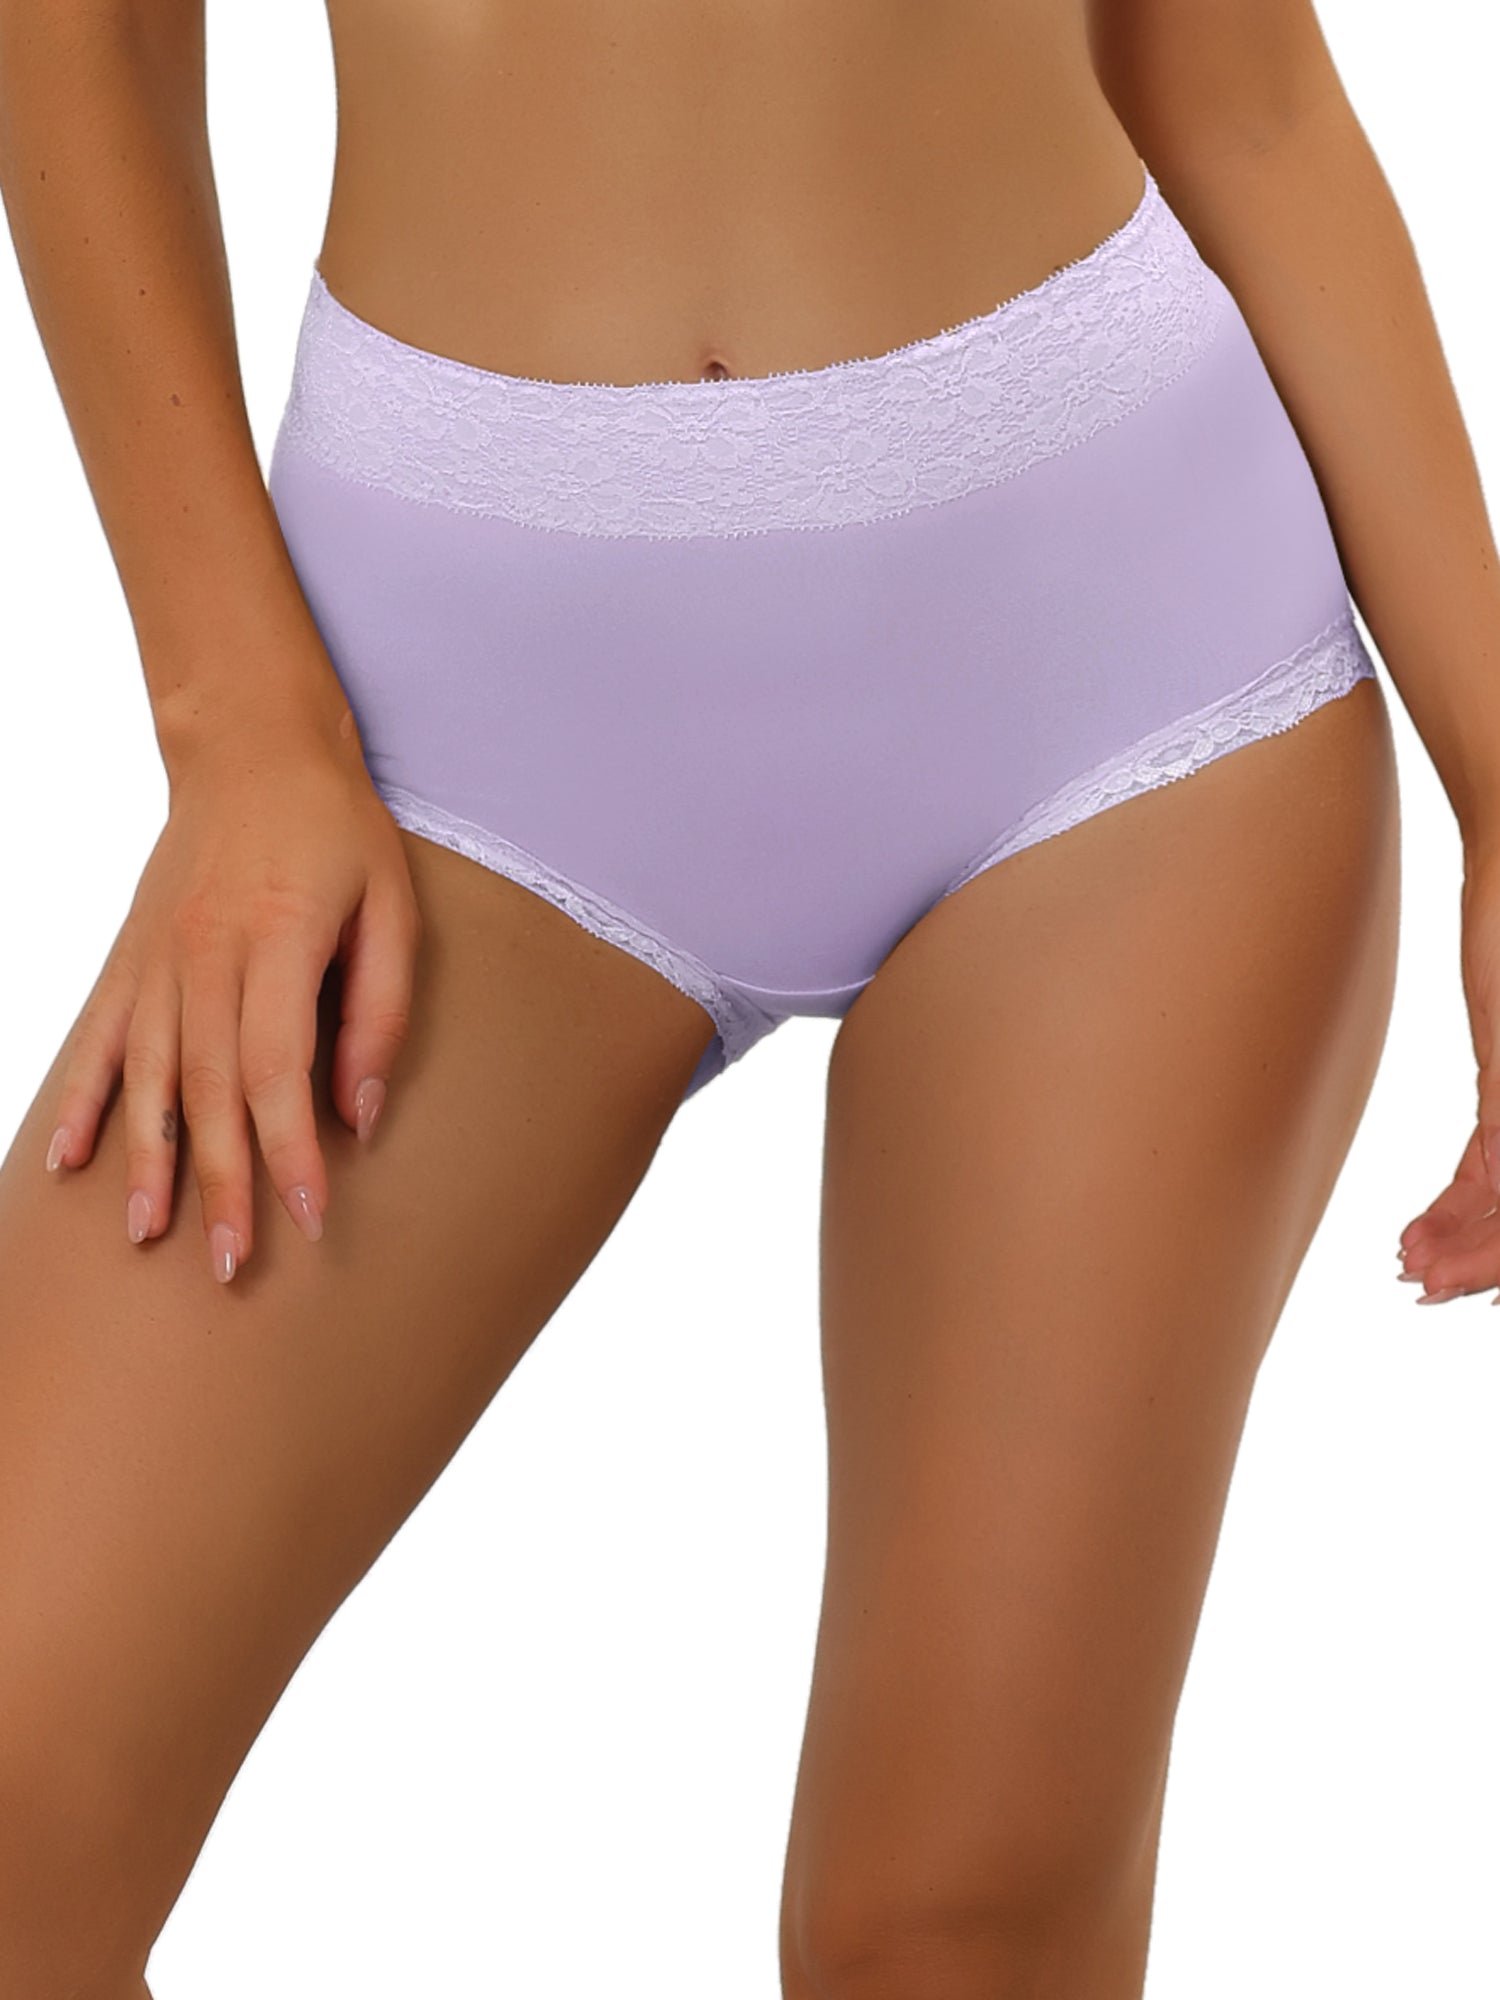 Women's Cotton High Waist (Available in Plus Size), Tummy Control